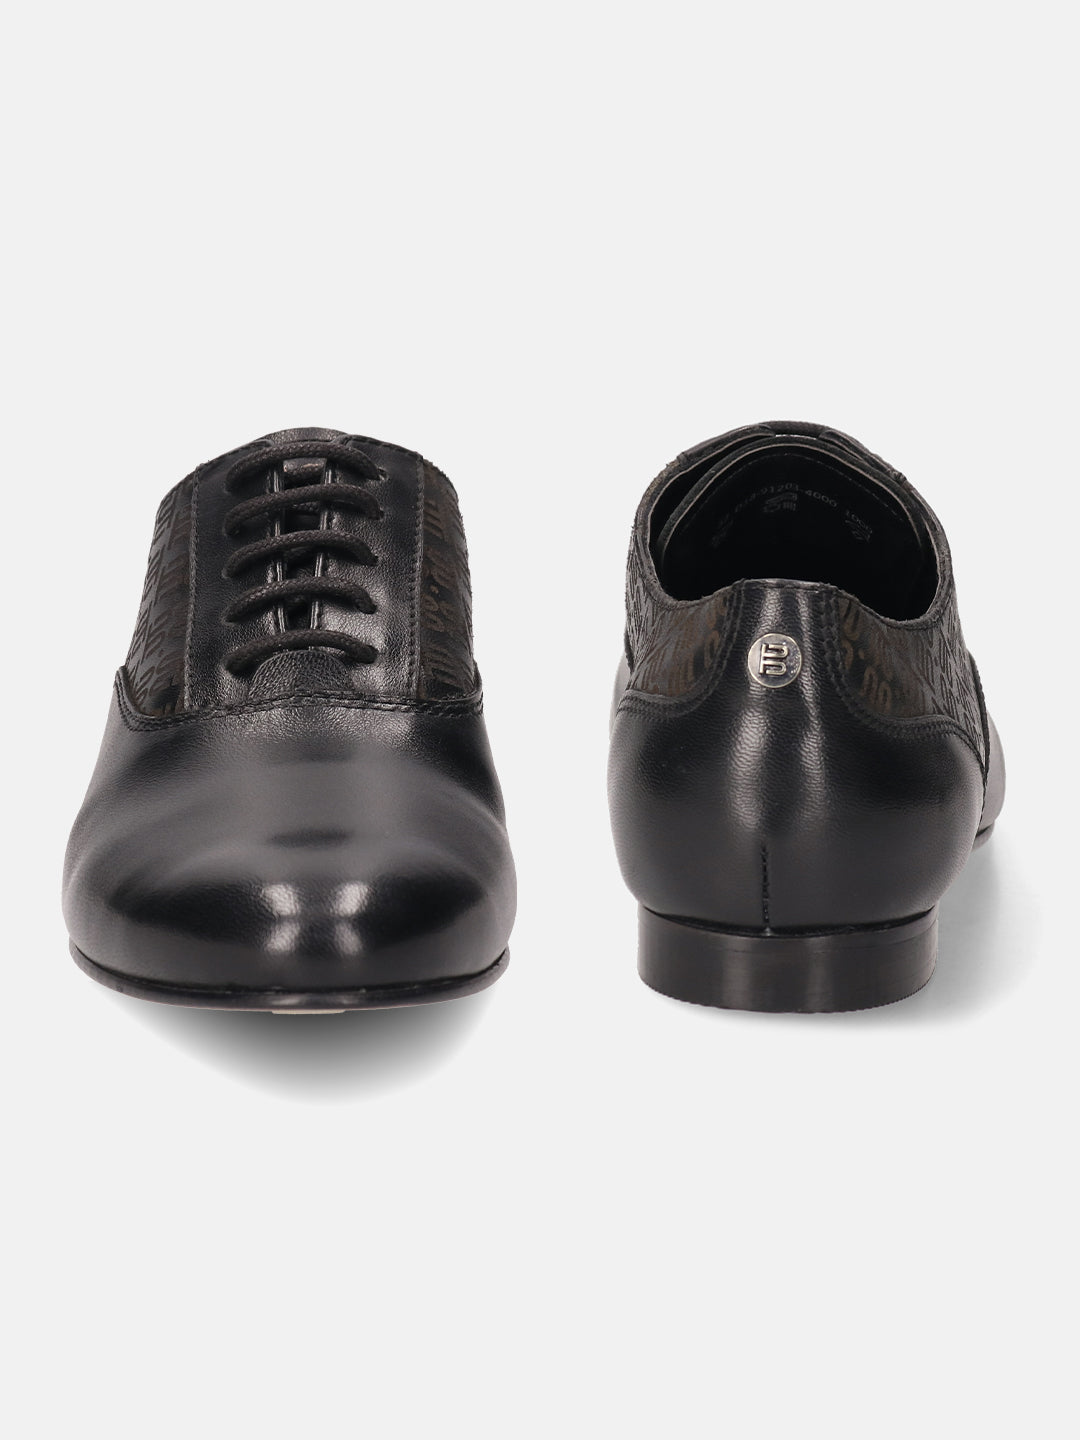 Anamica Black Leather Sneakers